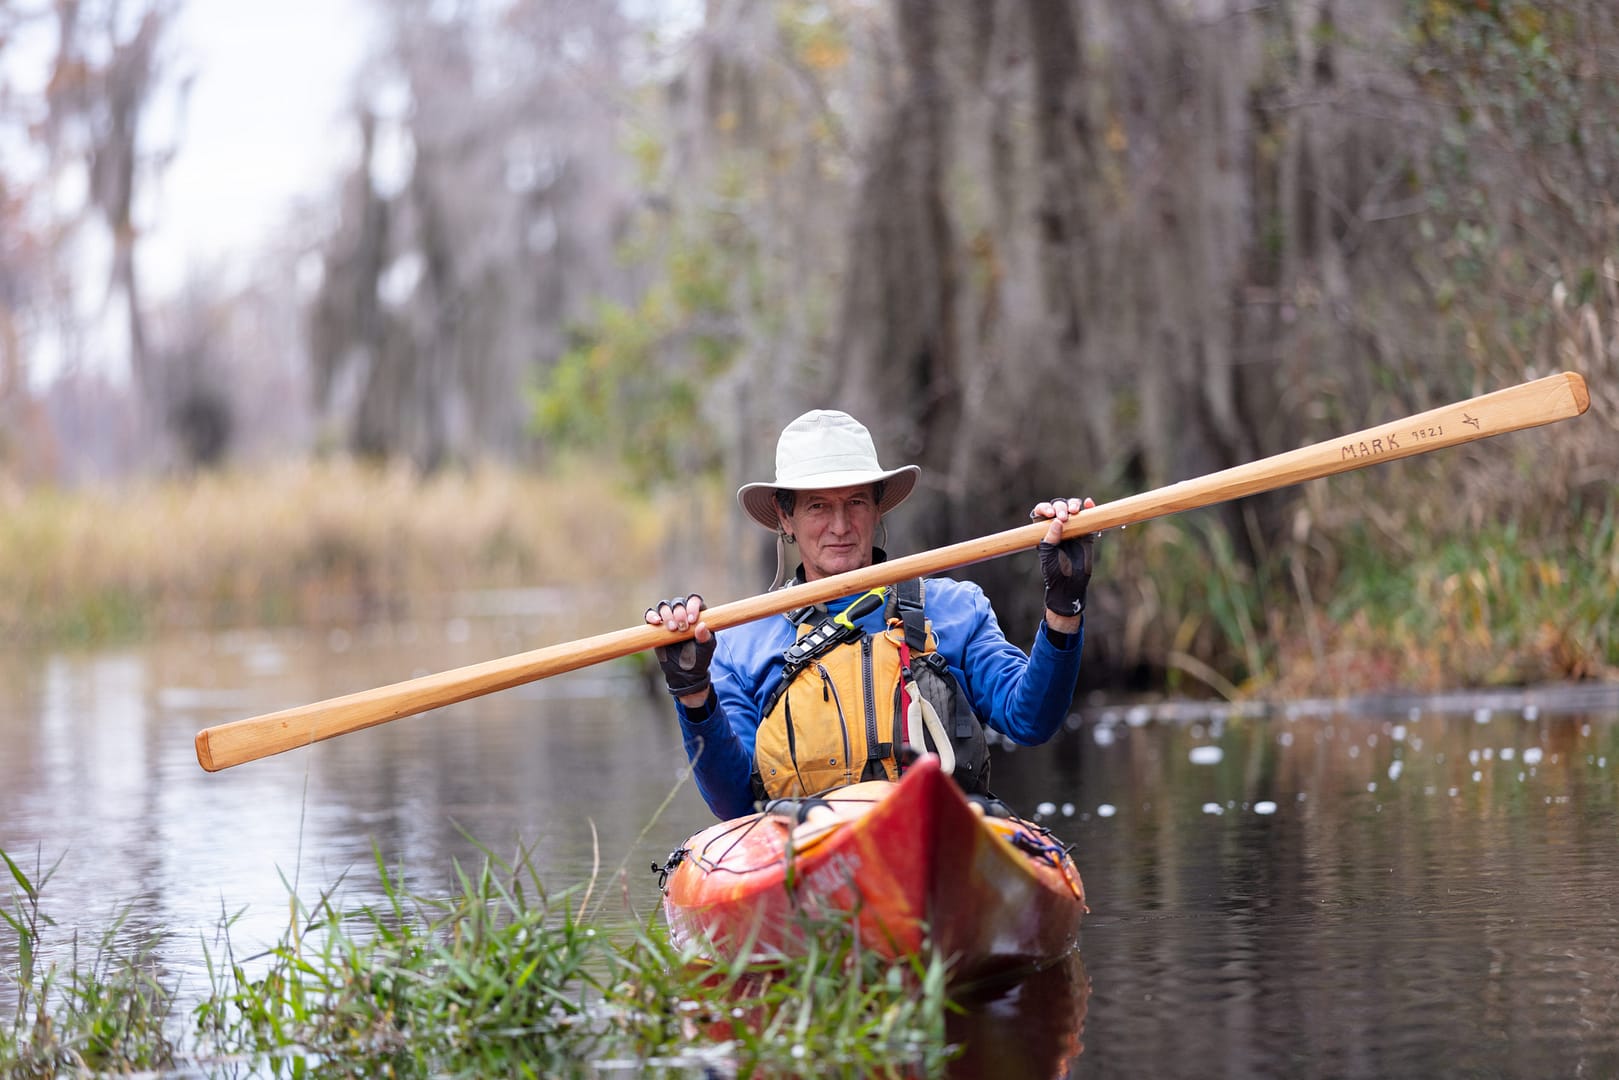 Paddle, Paddle, Paddle Your Kayak Gently Down the River